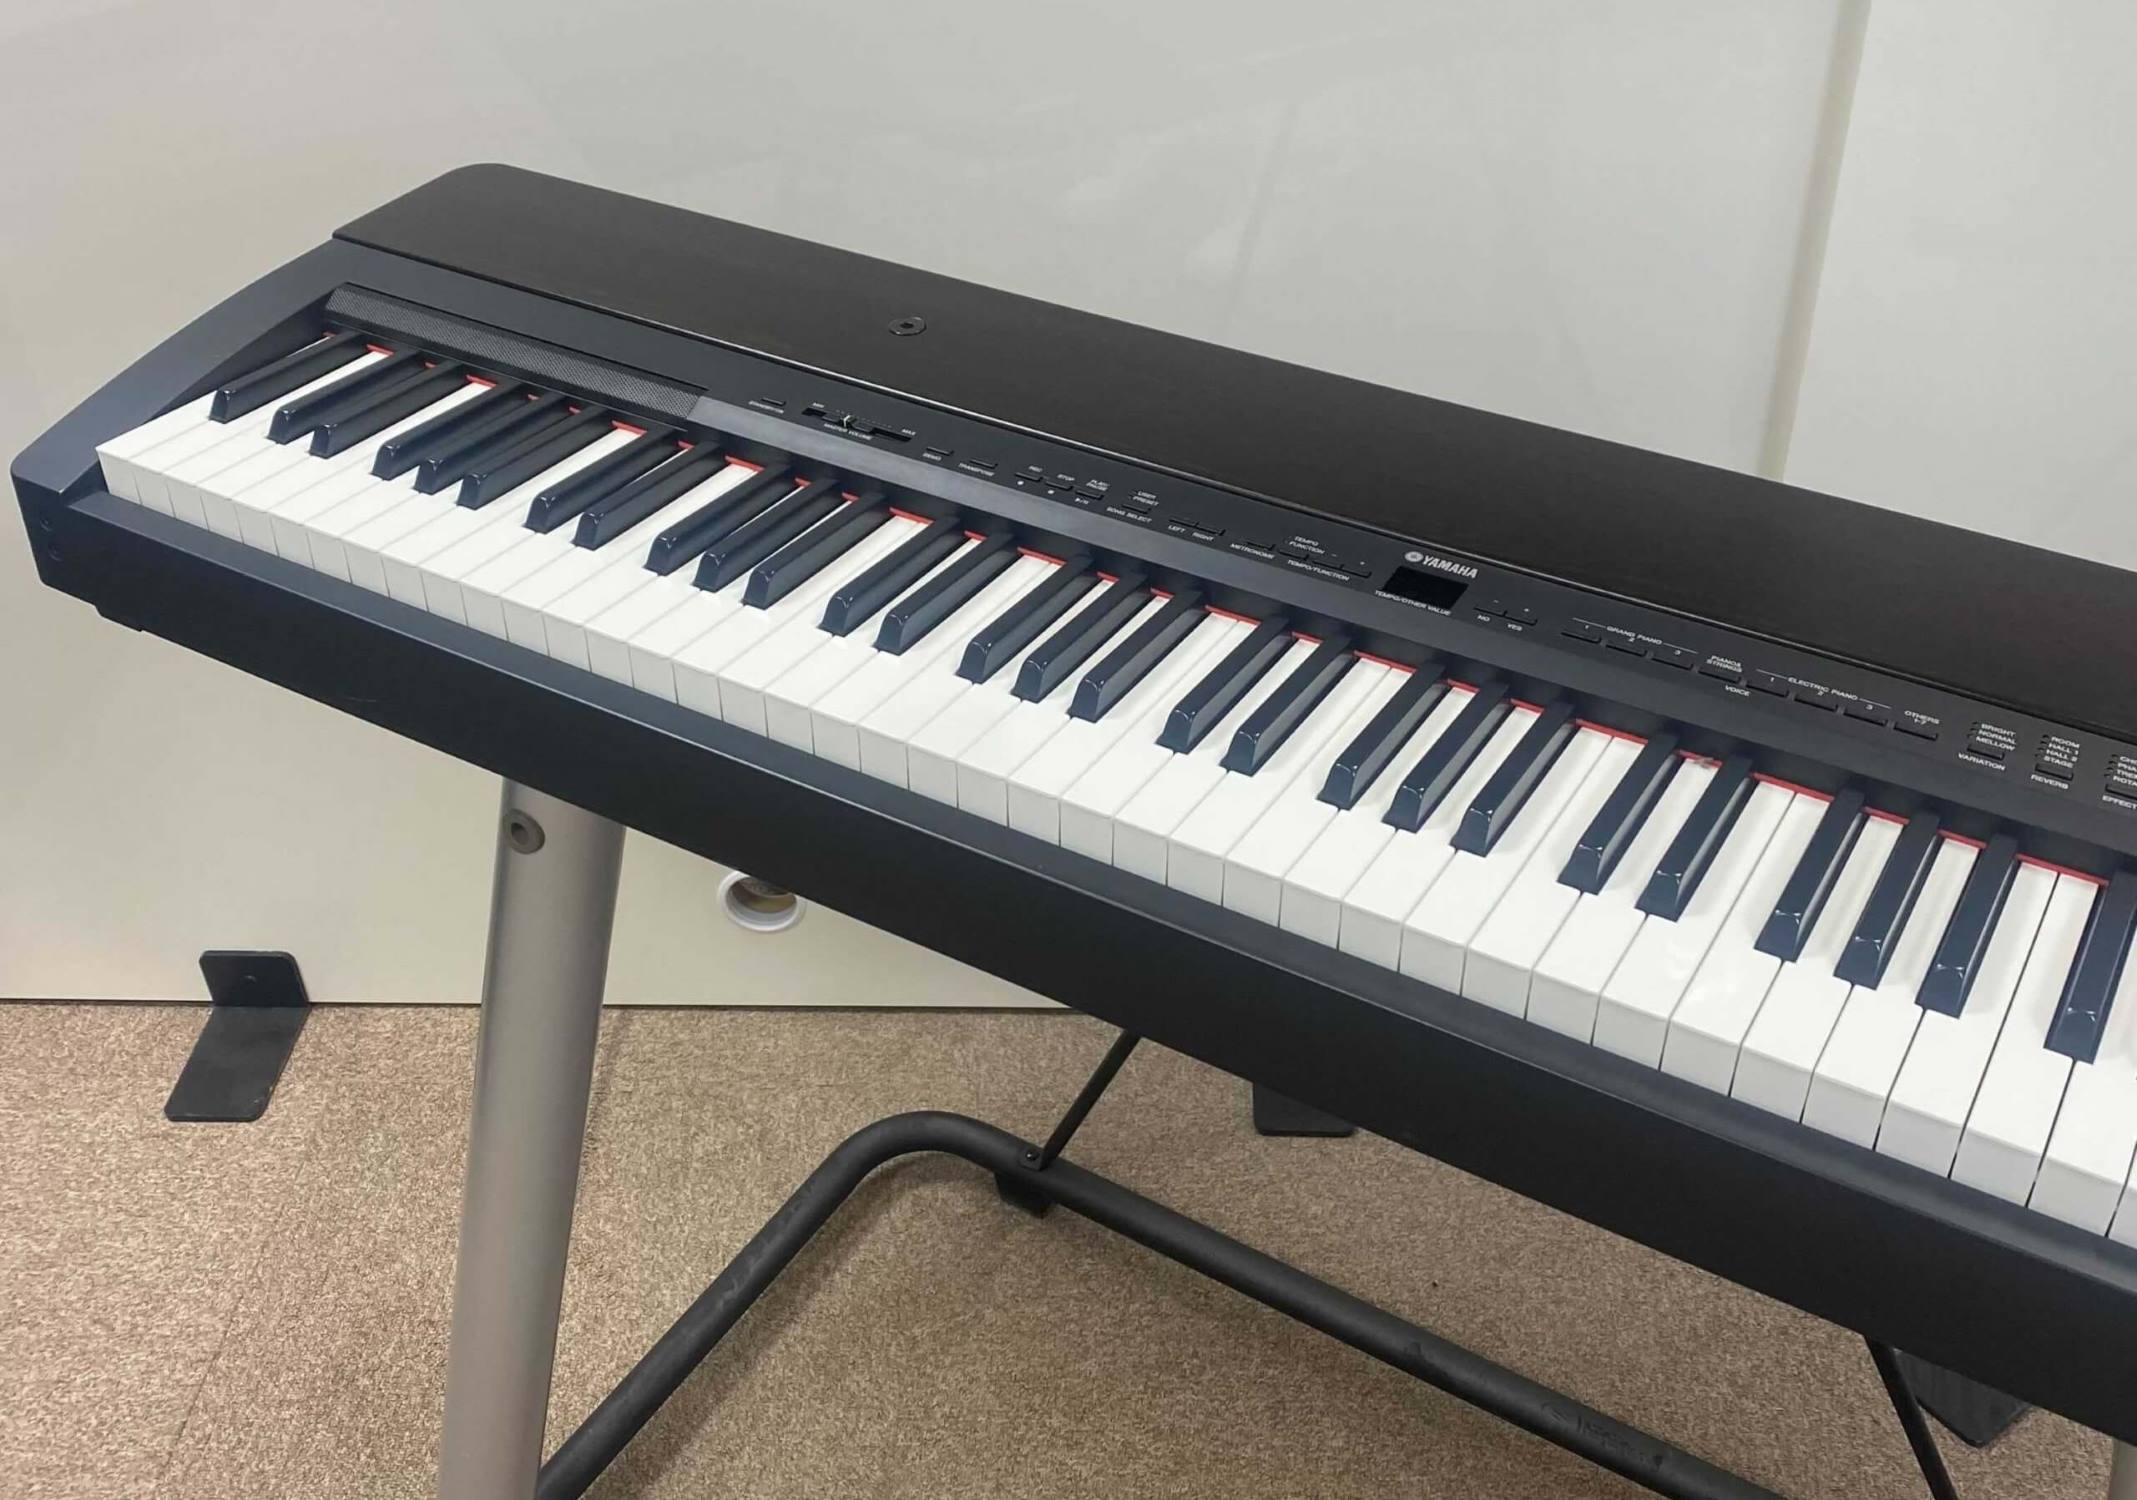 What Digital Piano Is Similar To The Yamaha P140